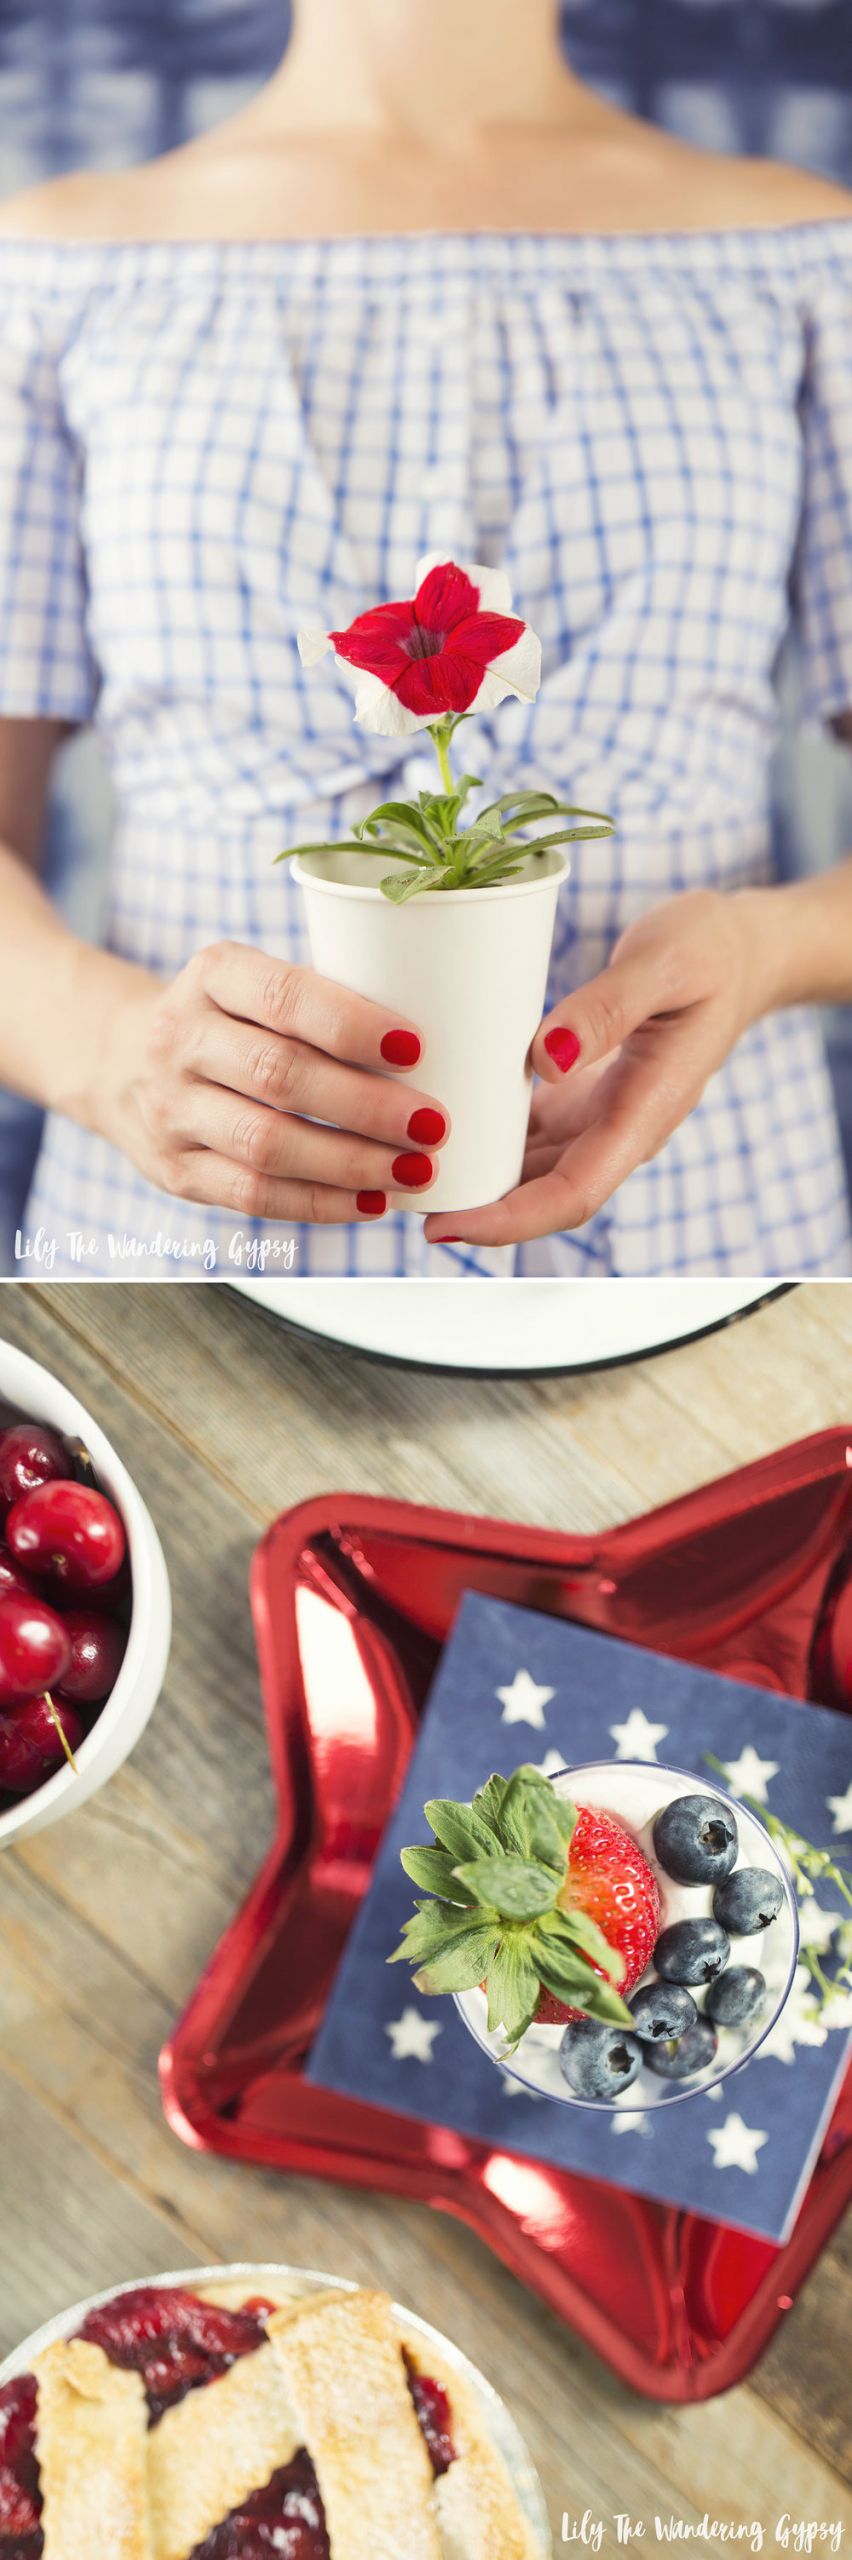 Memorial Day Party Food Ideas
 A Memorial Day Party With Balloon Time Get These Cute